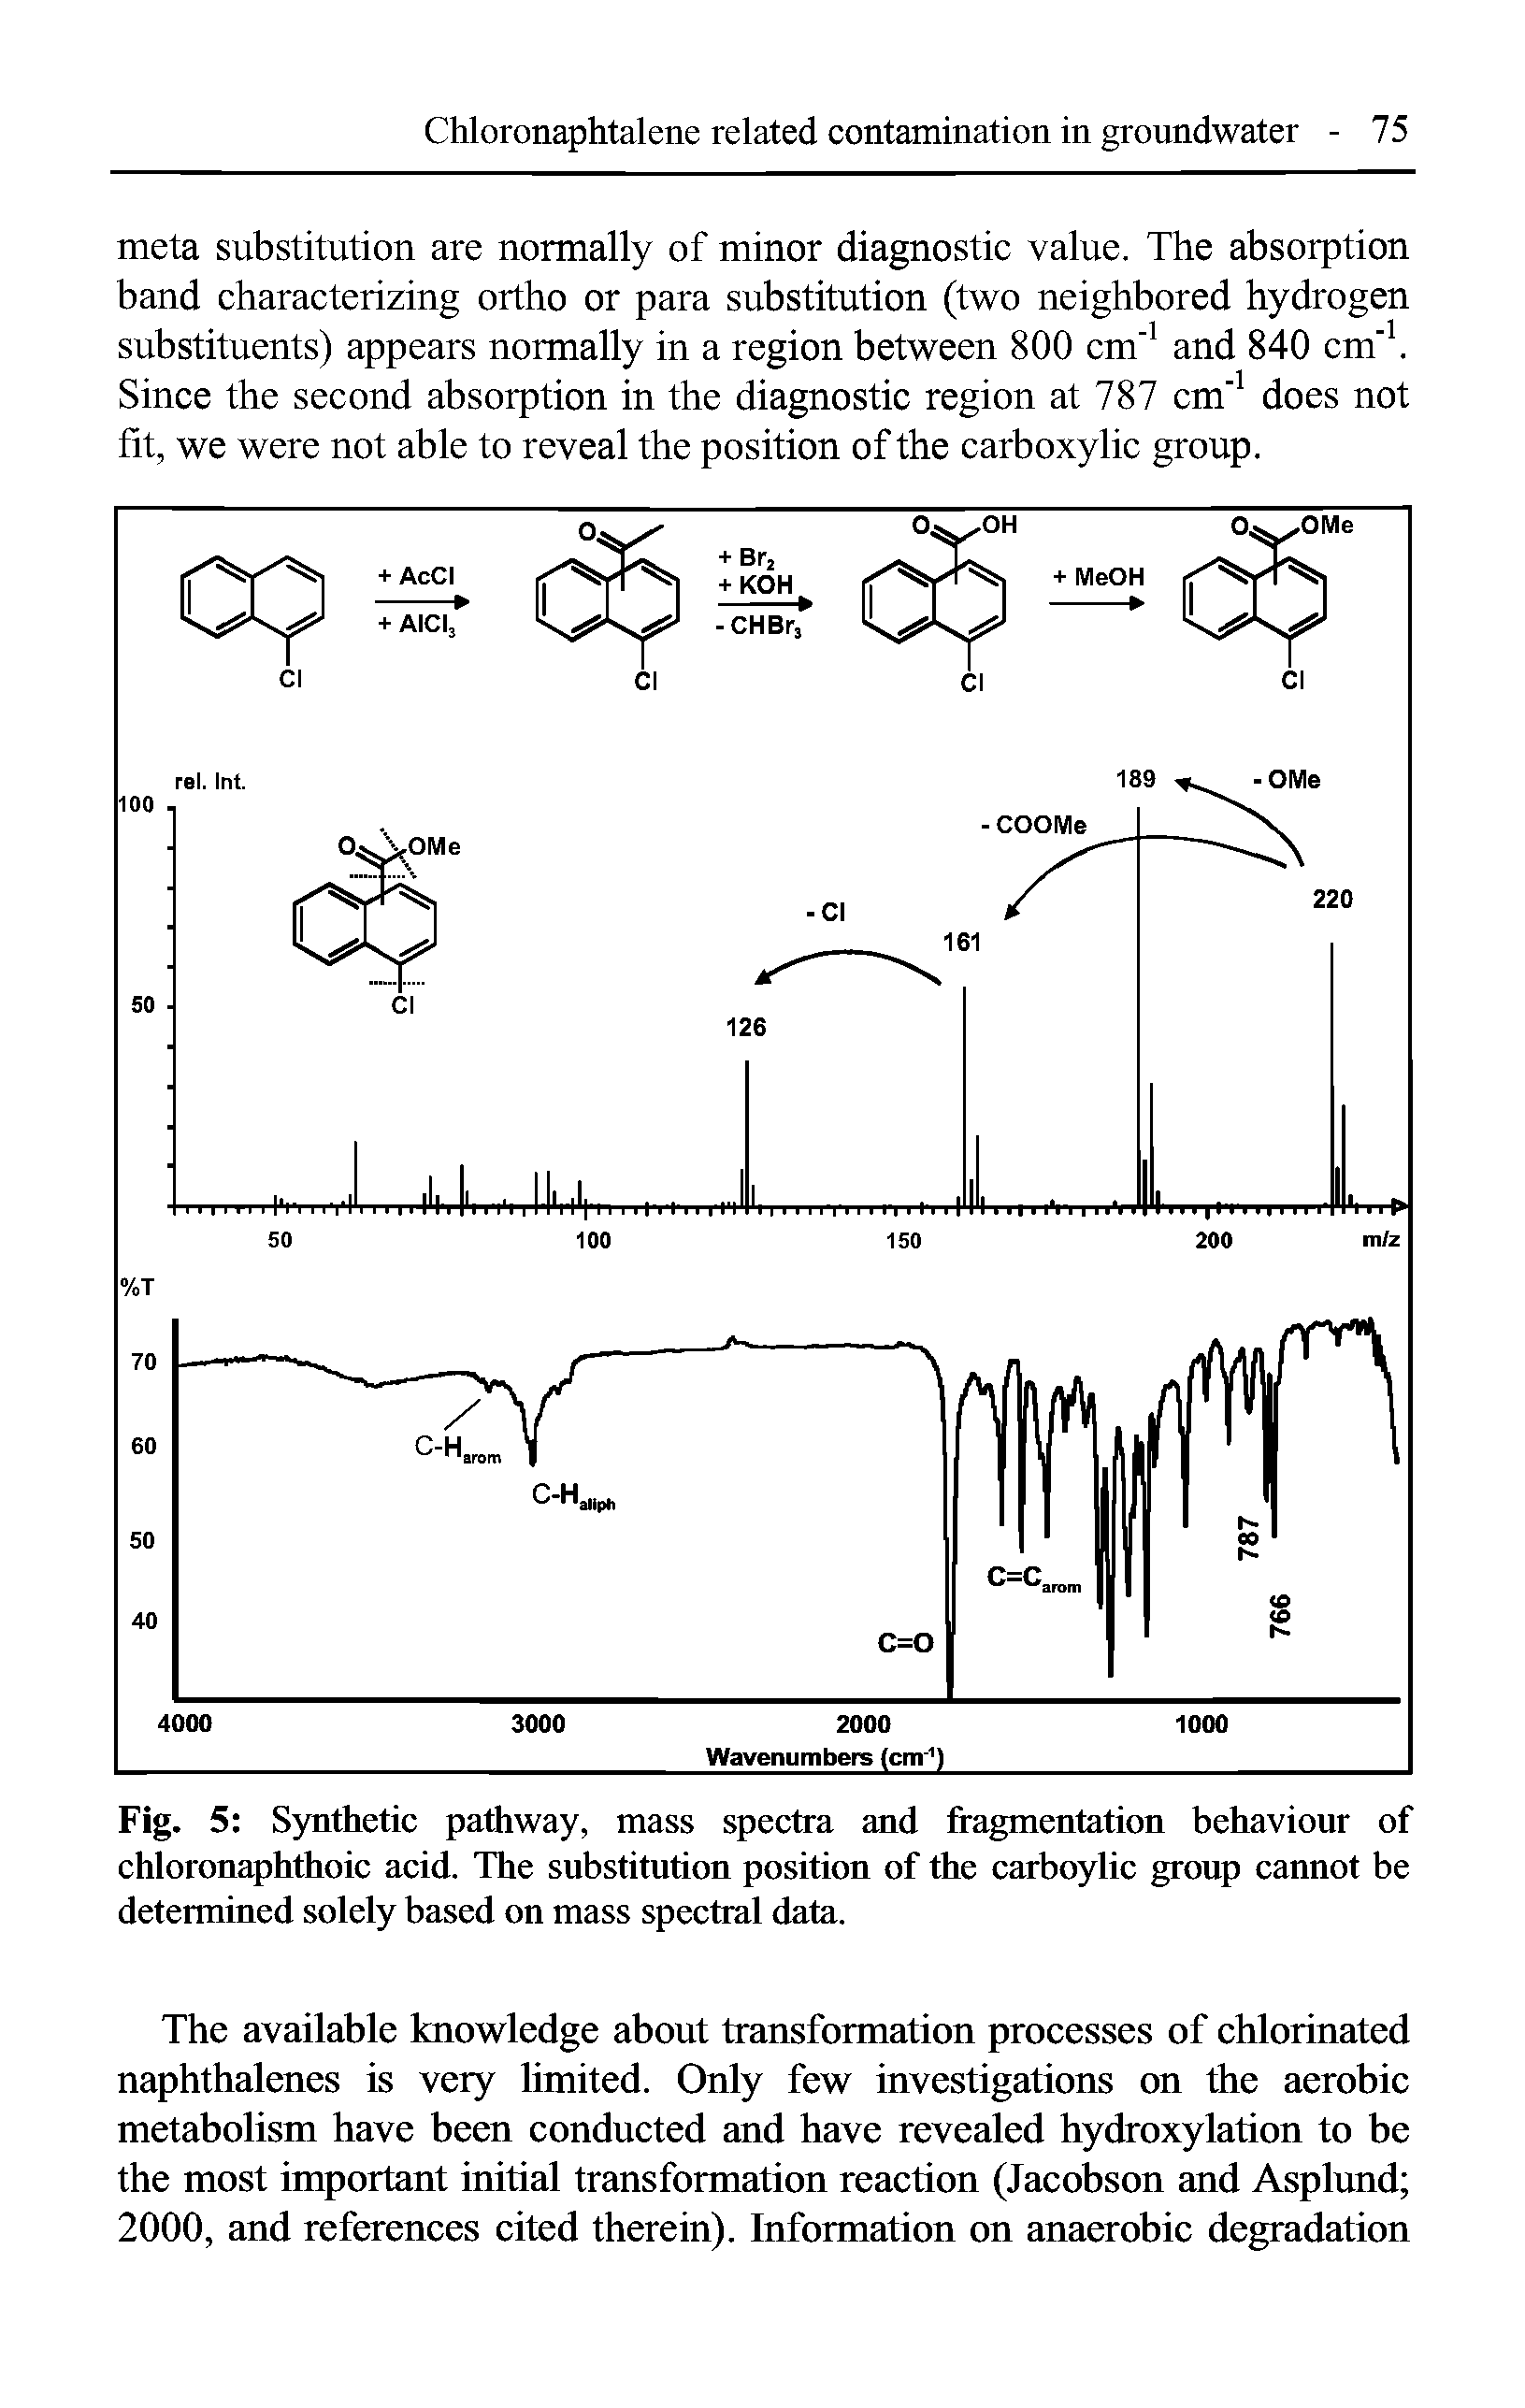 Fig. 5 Synthetic pathway, mass spectra and fragmentation behaviour of chloronaphthoic acid. The substitution position of the carboylic group cannot be determined solely based on mass spectral data.